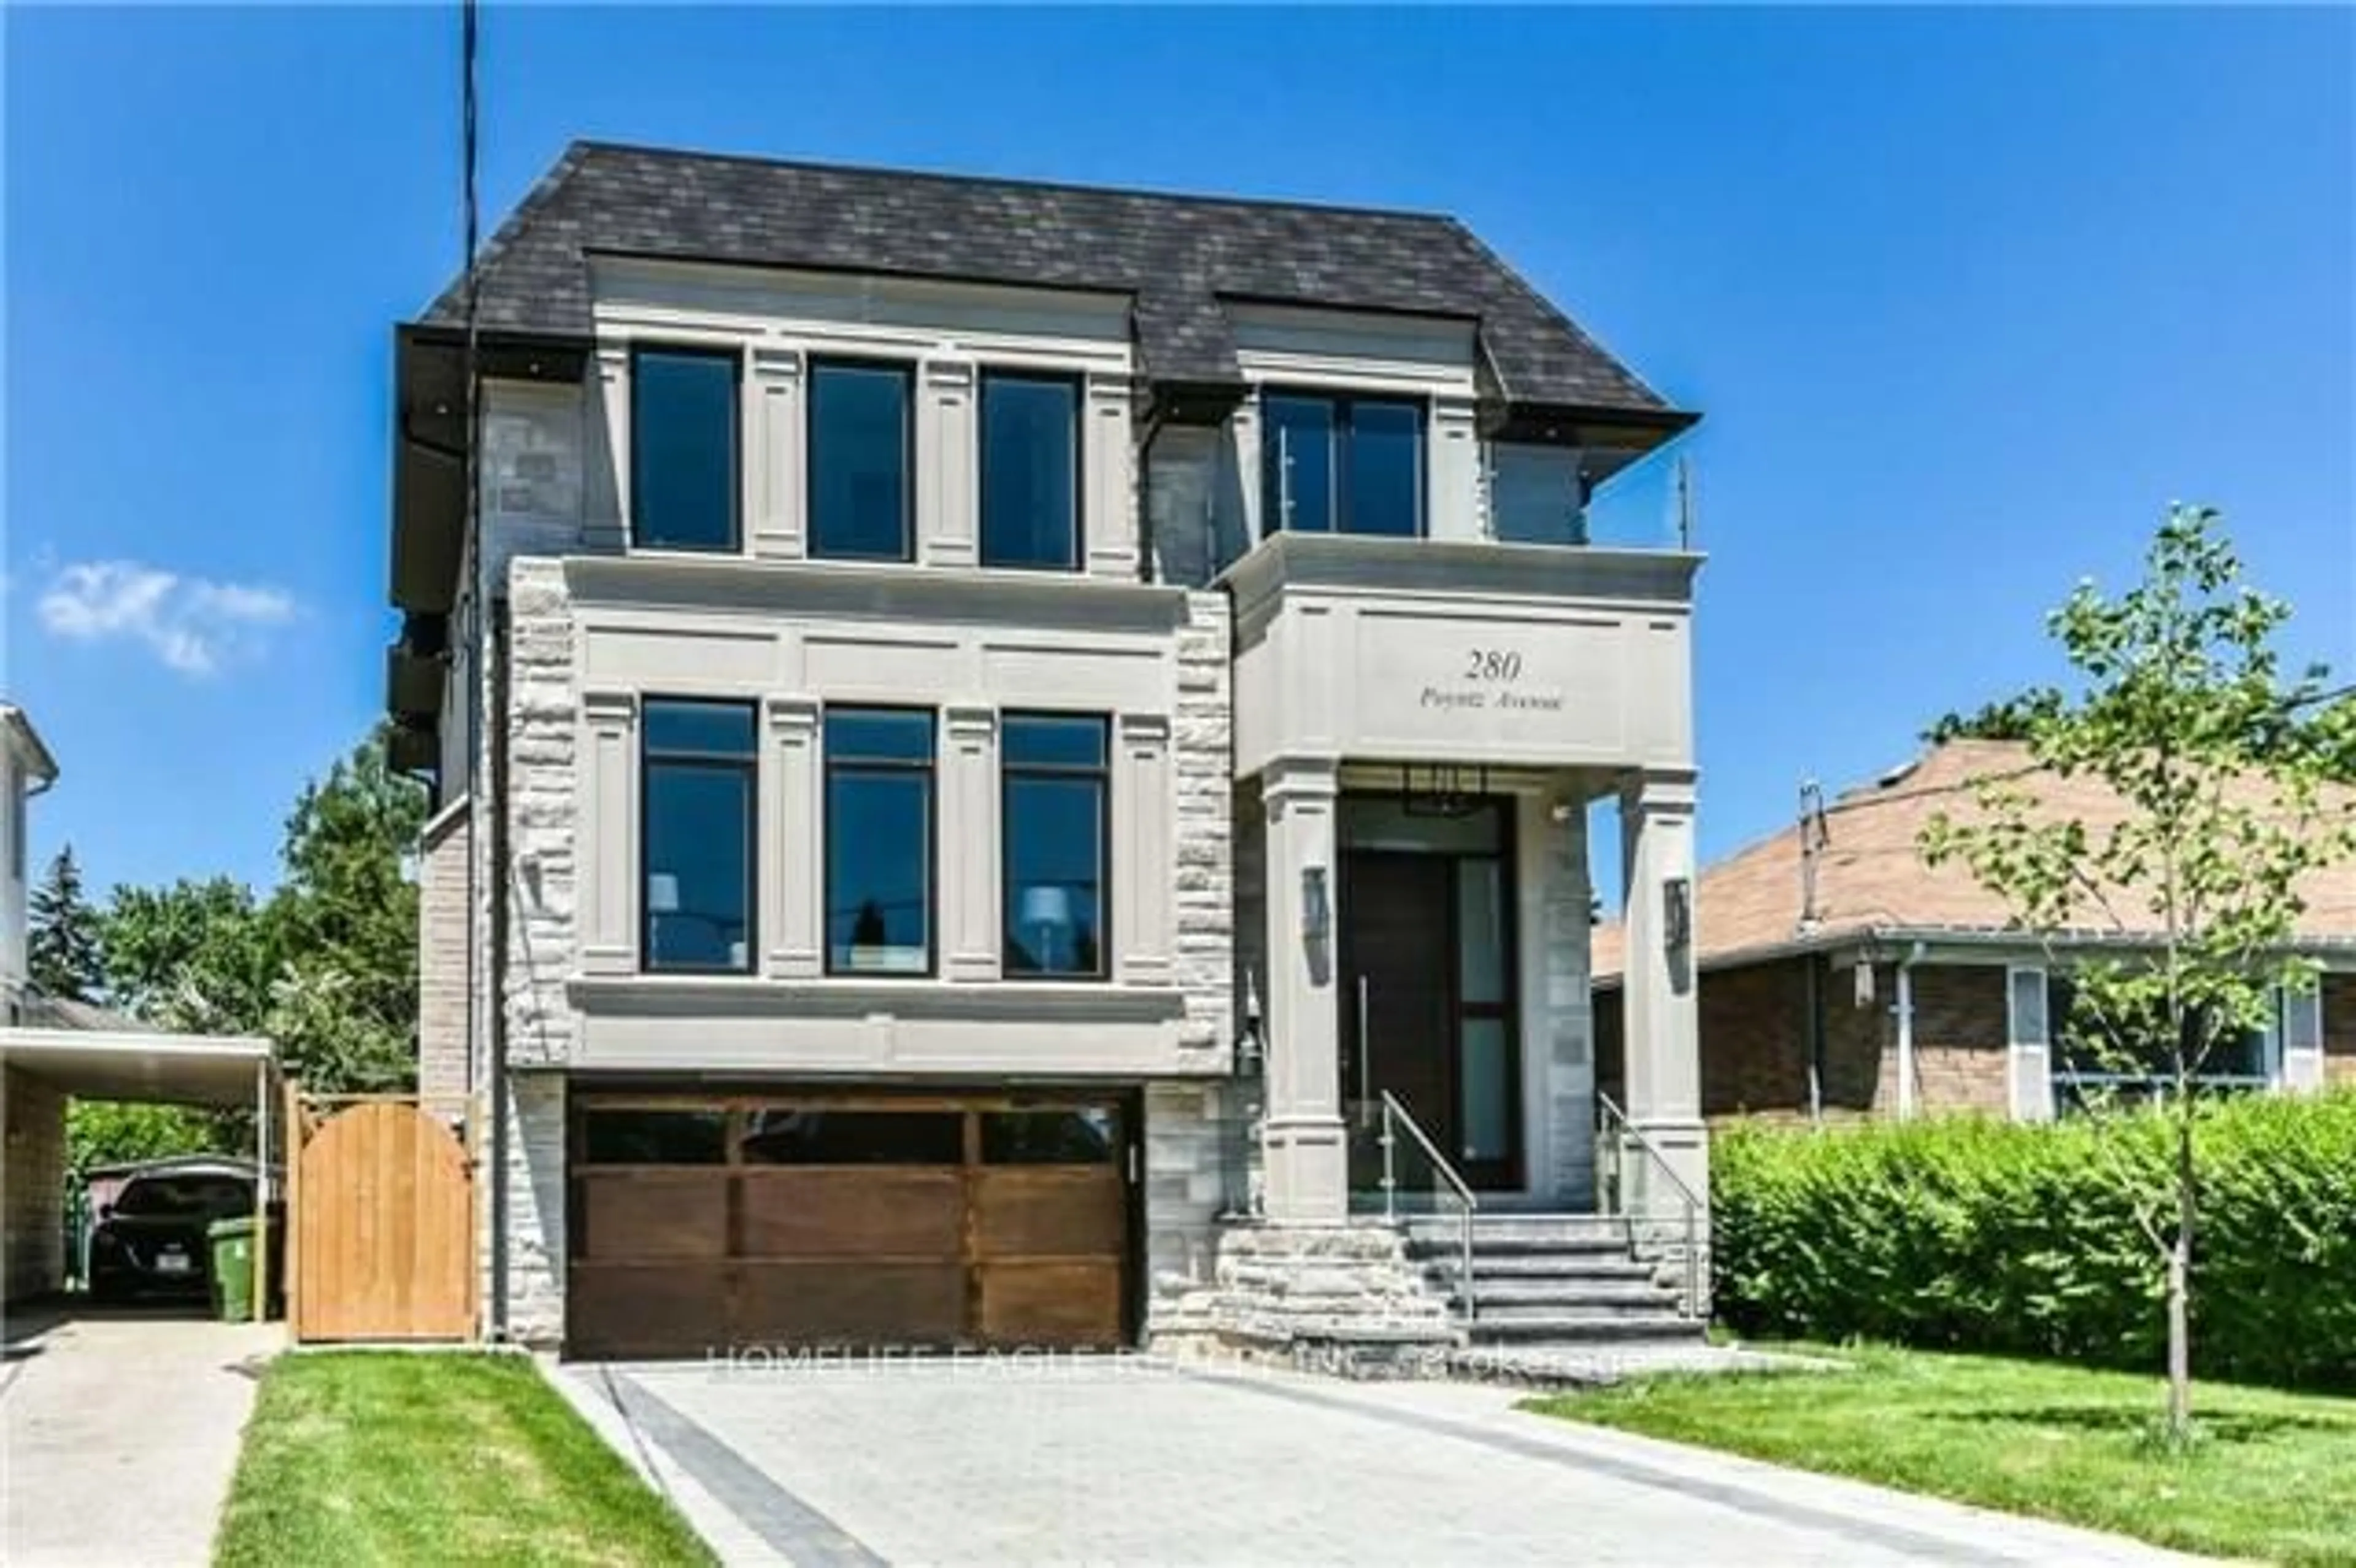 Home with brick exterior material for 280 Poyntz Ave, Toronto Ontario M2N 1J9